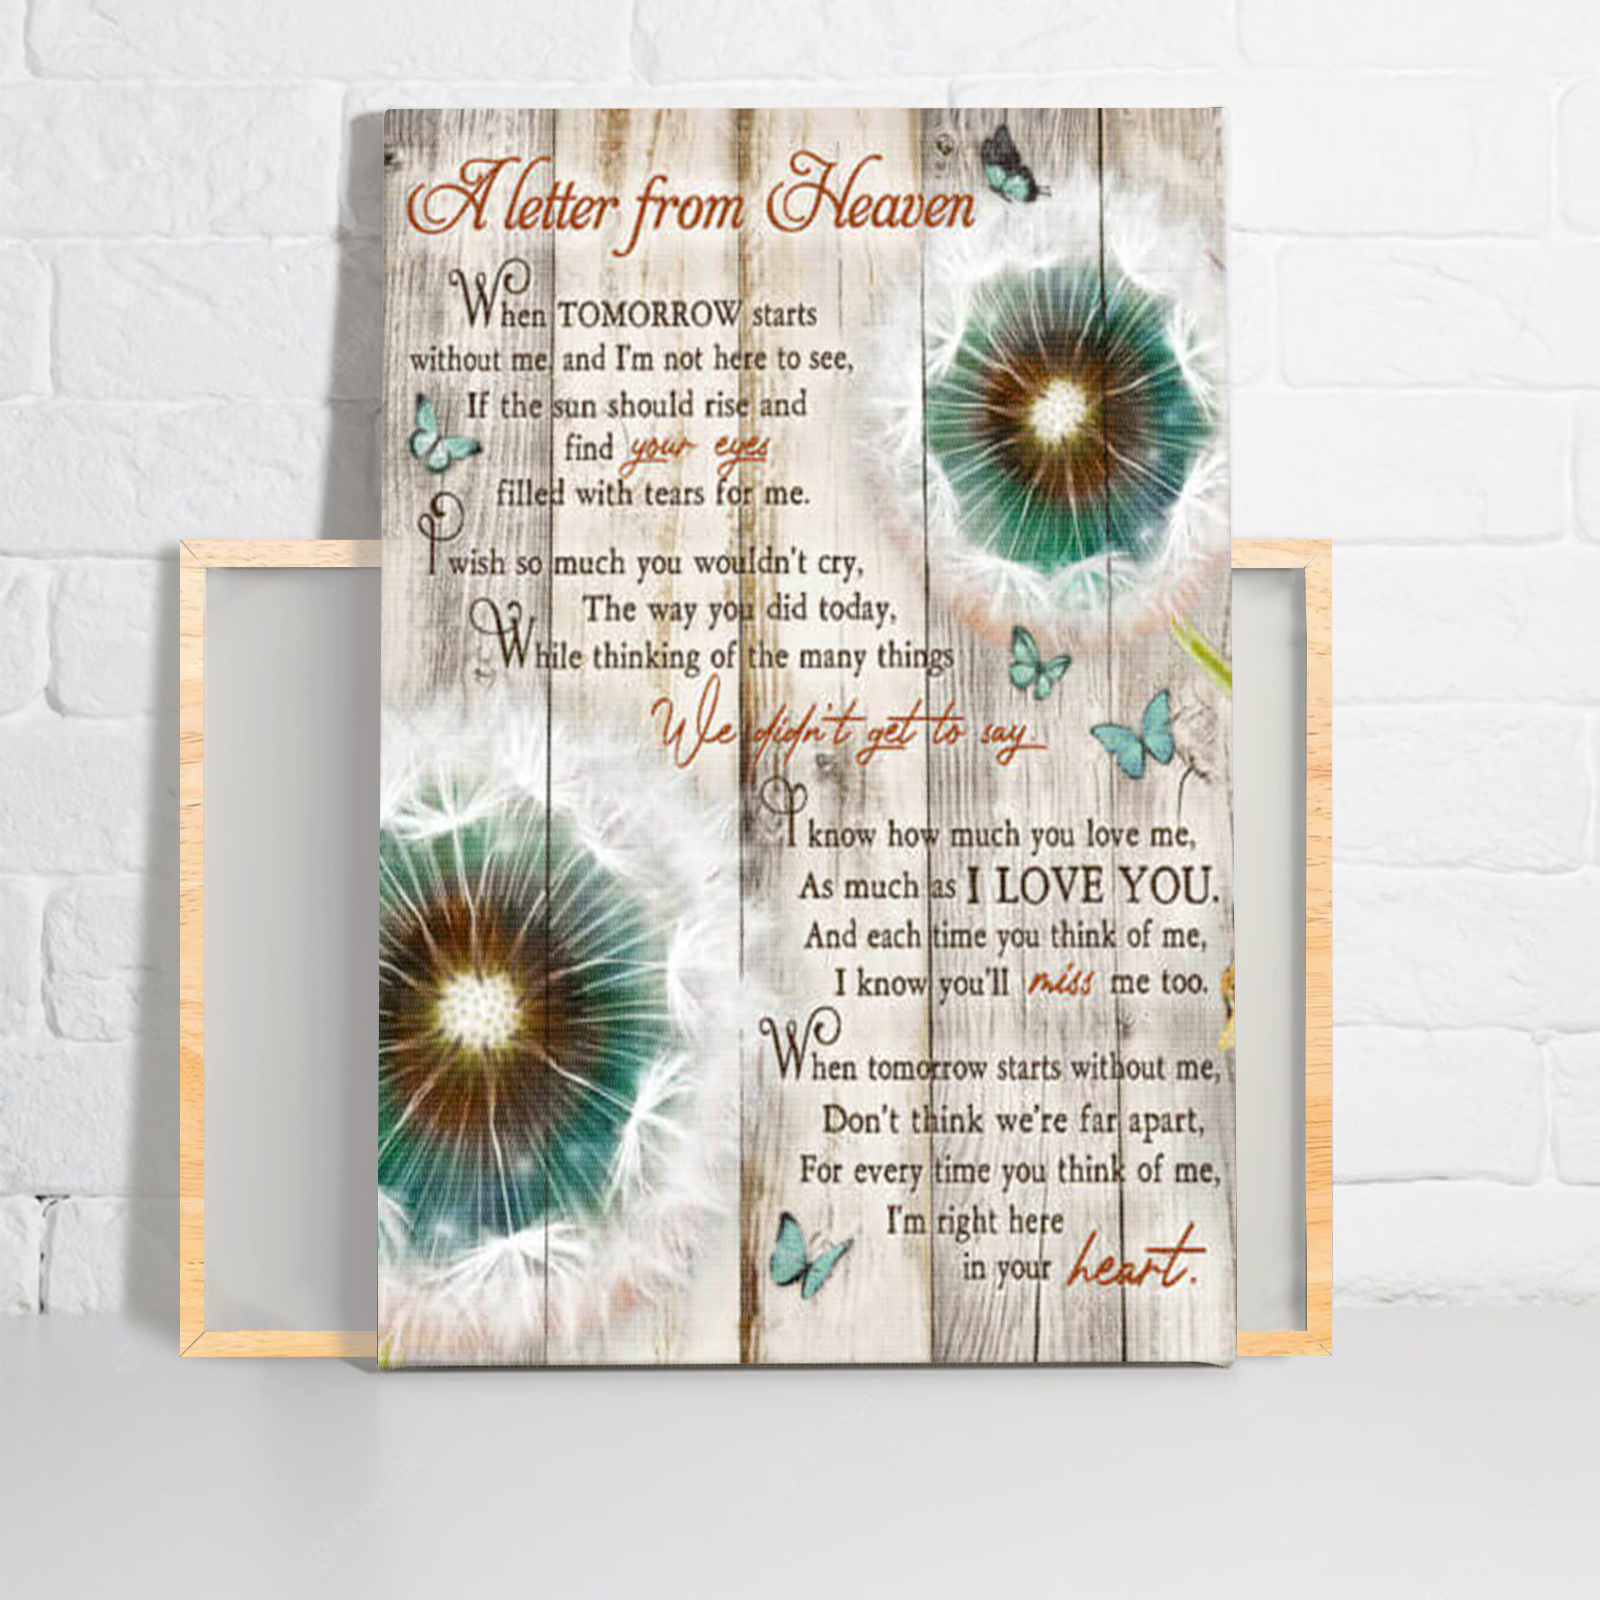 Dandelion and Butterflies Portrait Canvas, A letter from heaven Wall Art Decor Canvas, Perfect Gift For Dandelion Lovers, Friend, Family